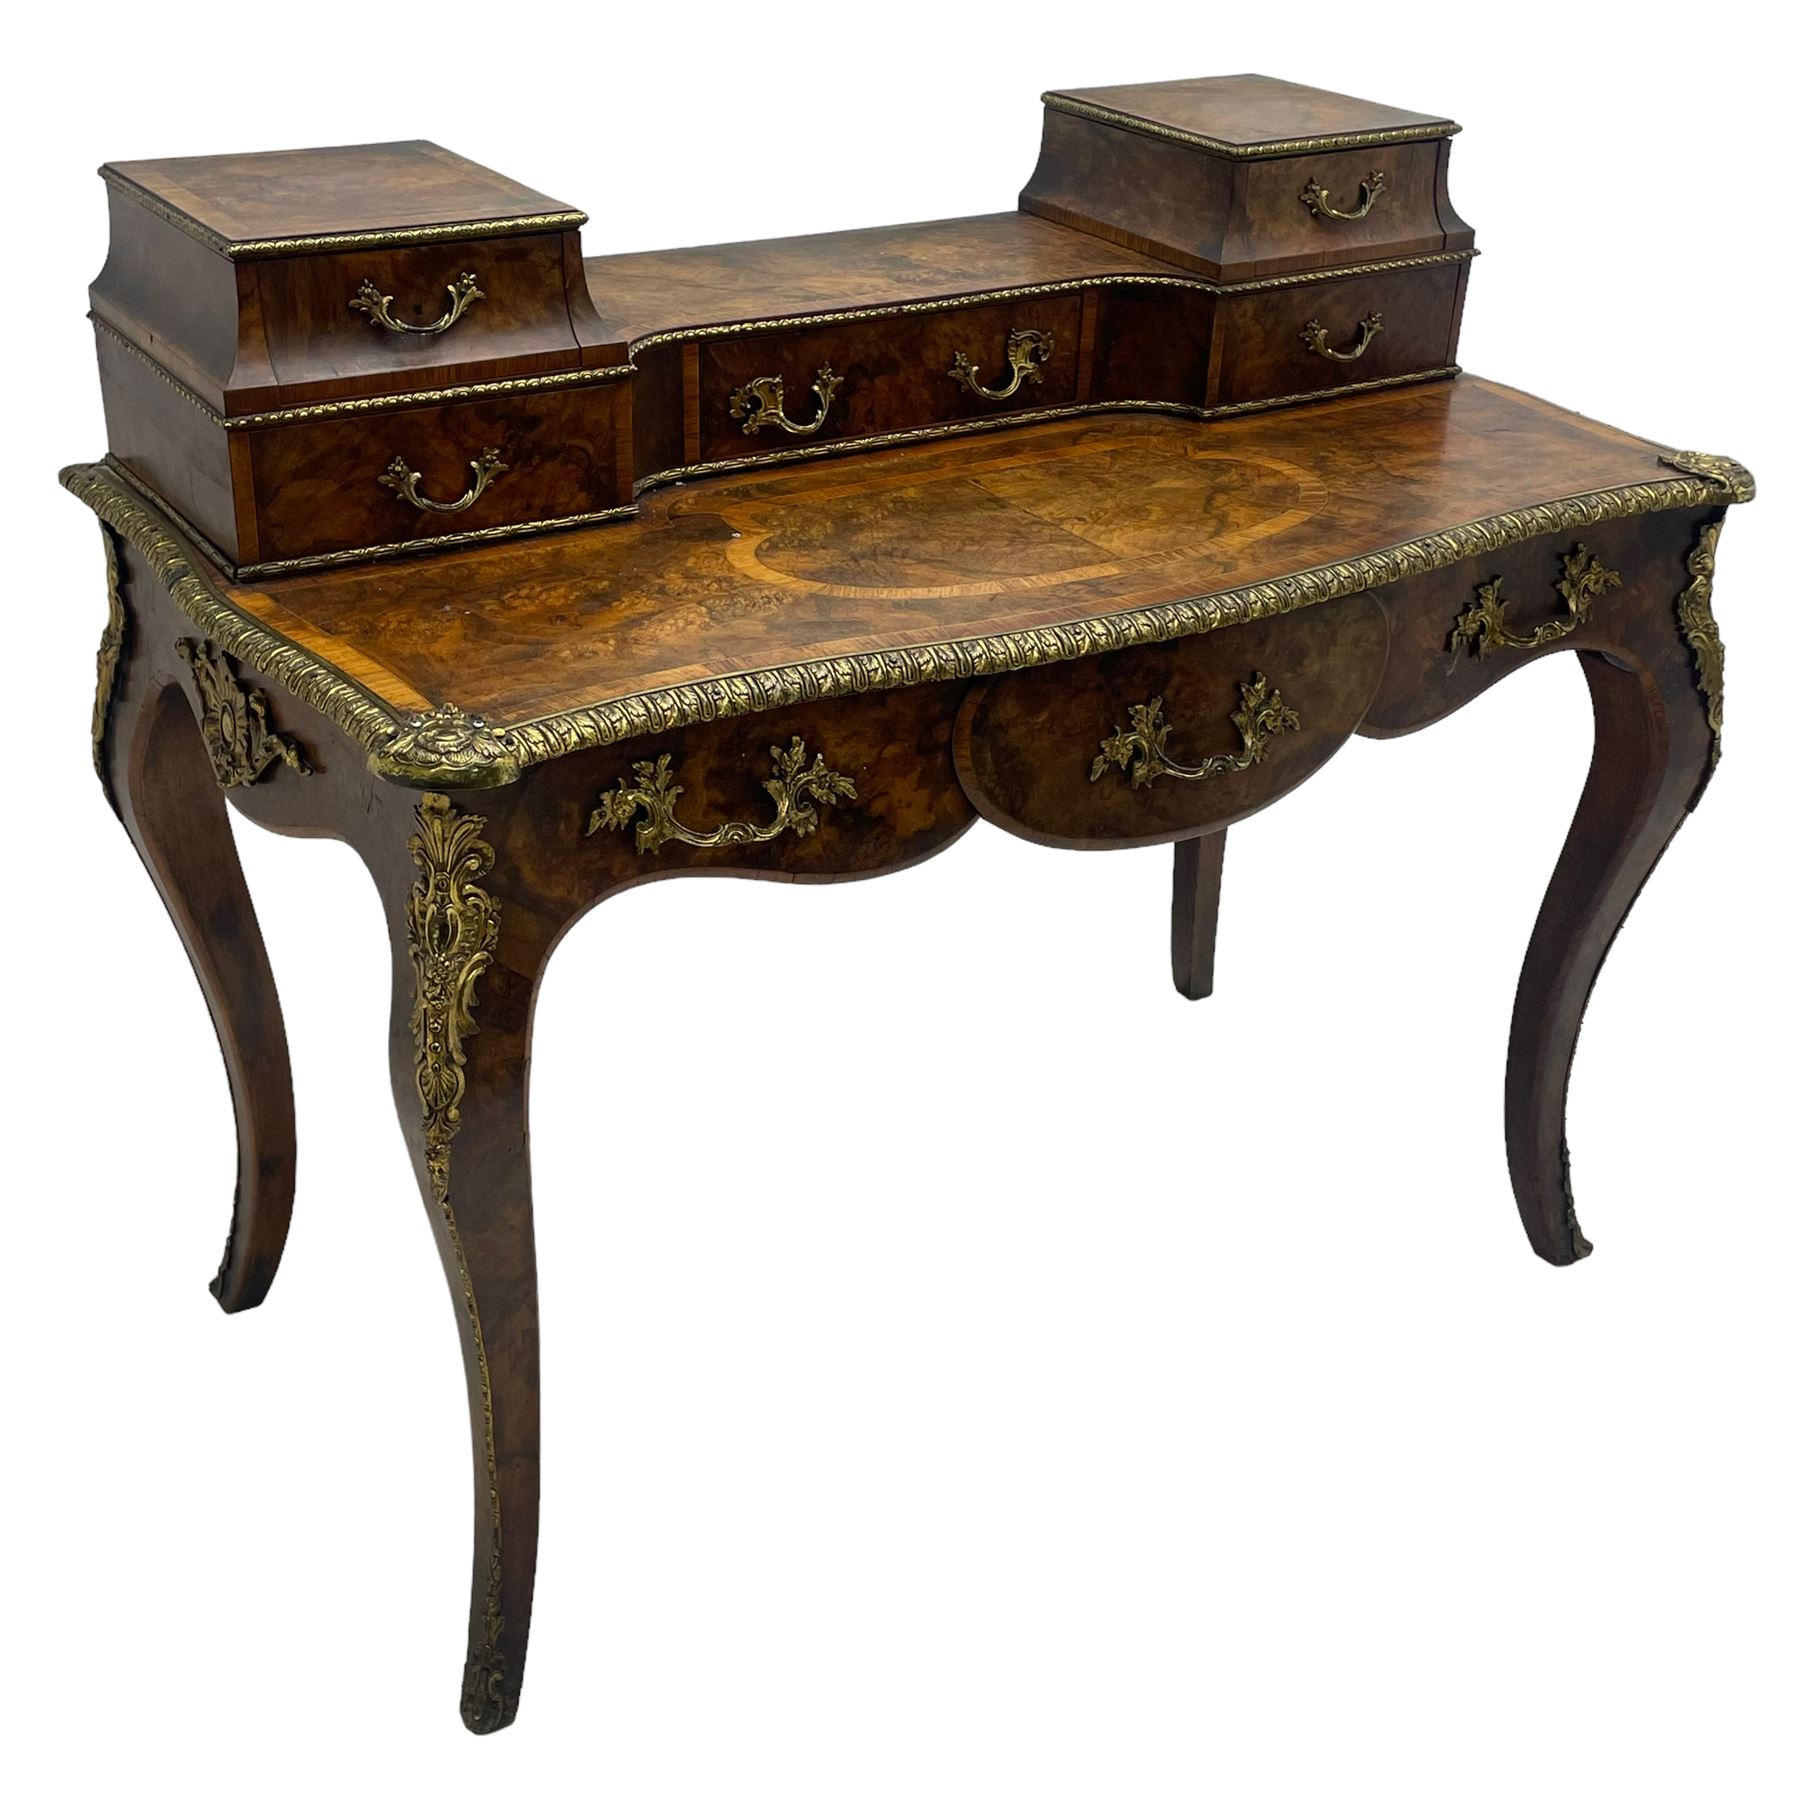 Late 19th to early 20th century French figured walnut writing desk - Image 13 of 13